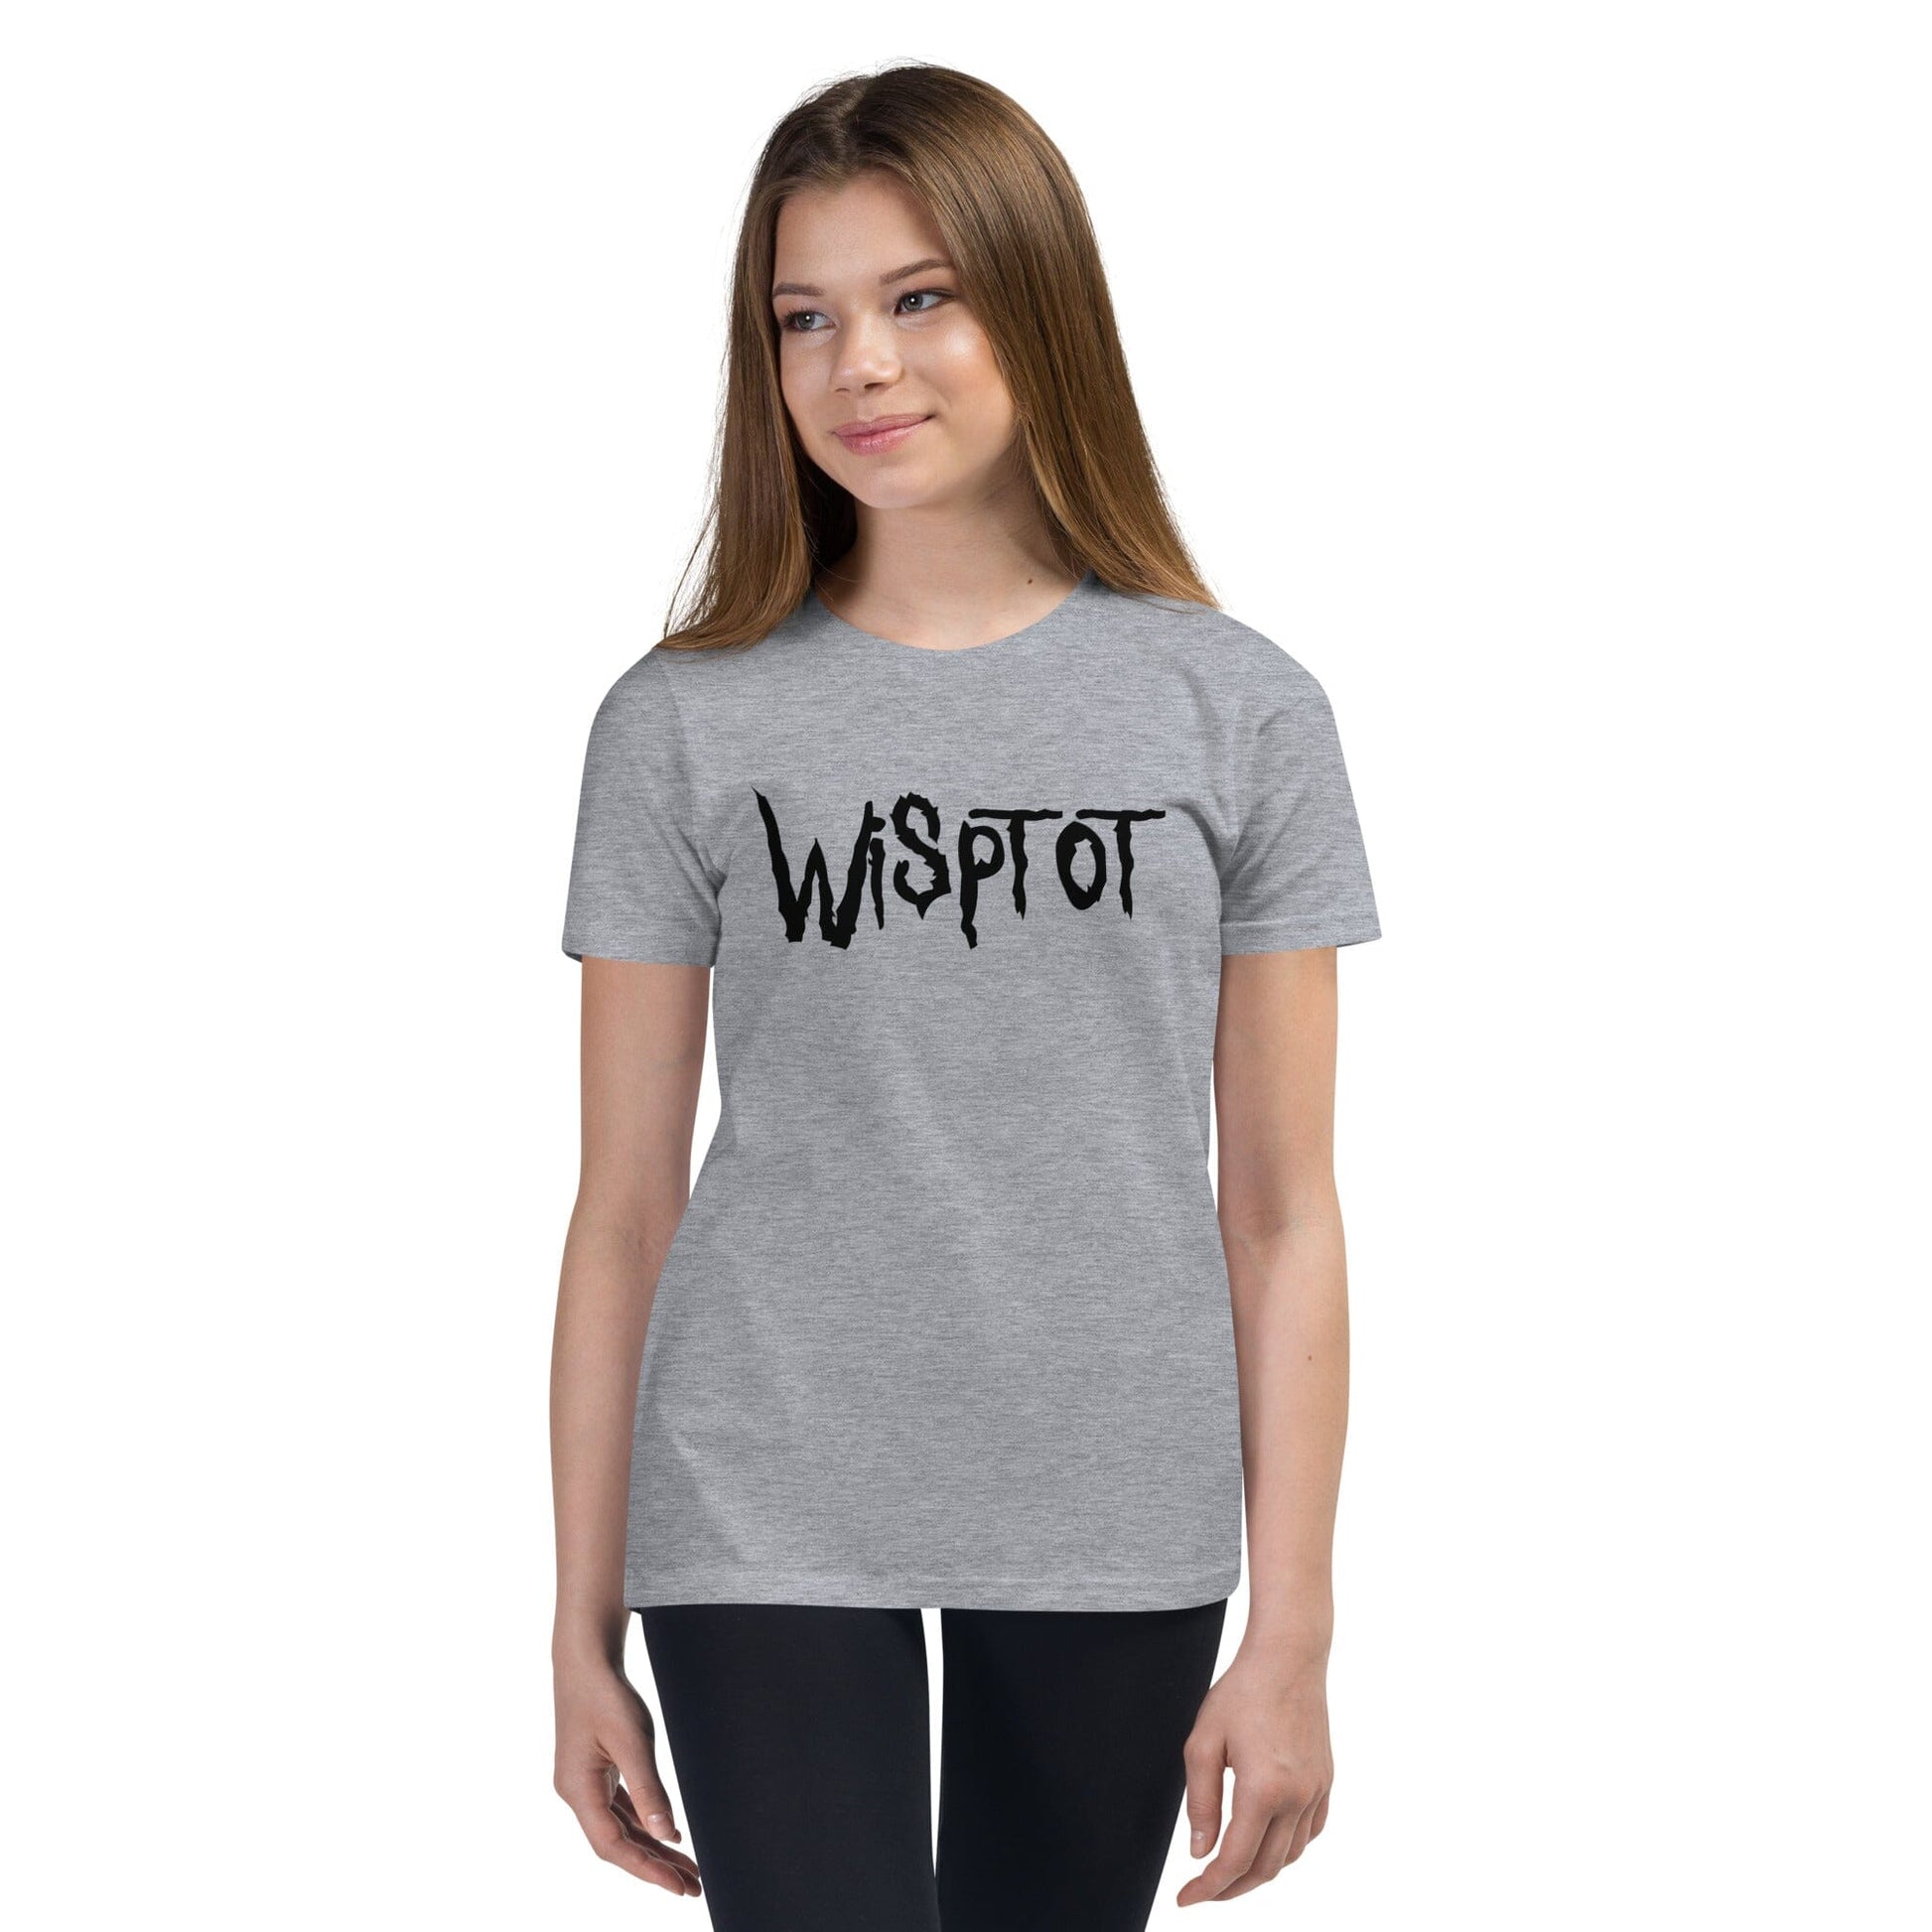 WispTot YOUTH T-Shirt [Unfoiled] (All net proceeds go to equally to Kitty CrusAIDe and Rags to Riches Animal Rescue) JoyousJoyfulJoyness Athletic Heather S 